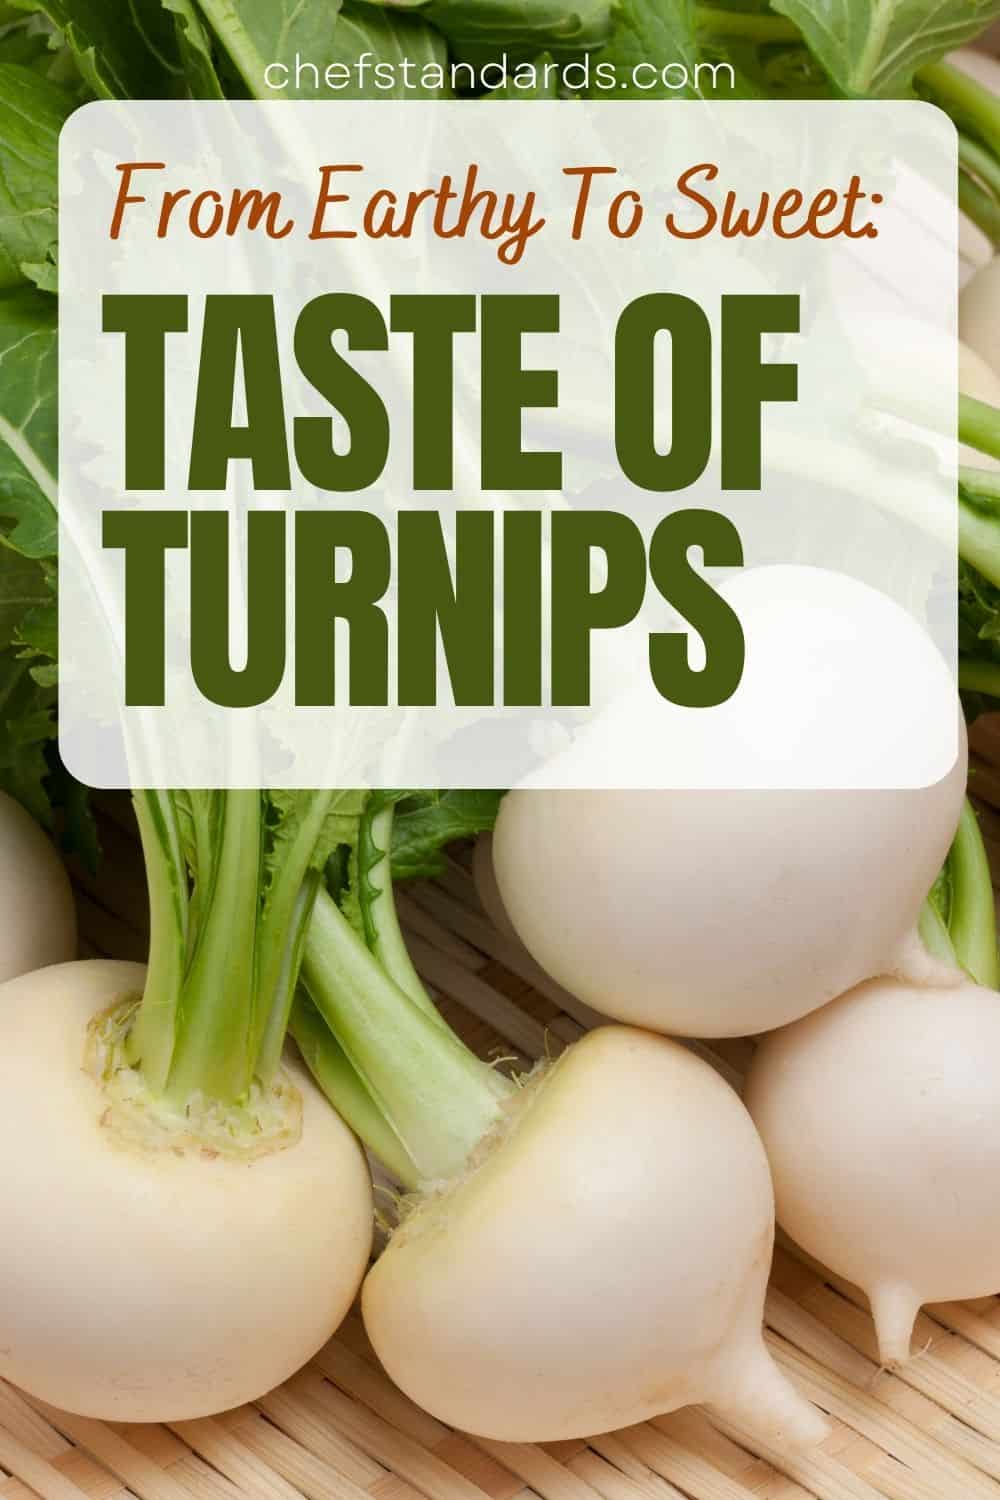 What Do Turnips Taste Like Raw And Cooked Flavors Showdown